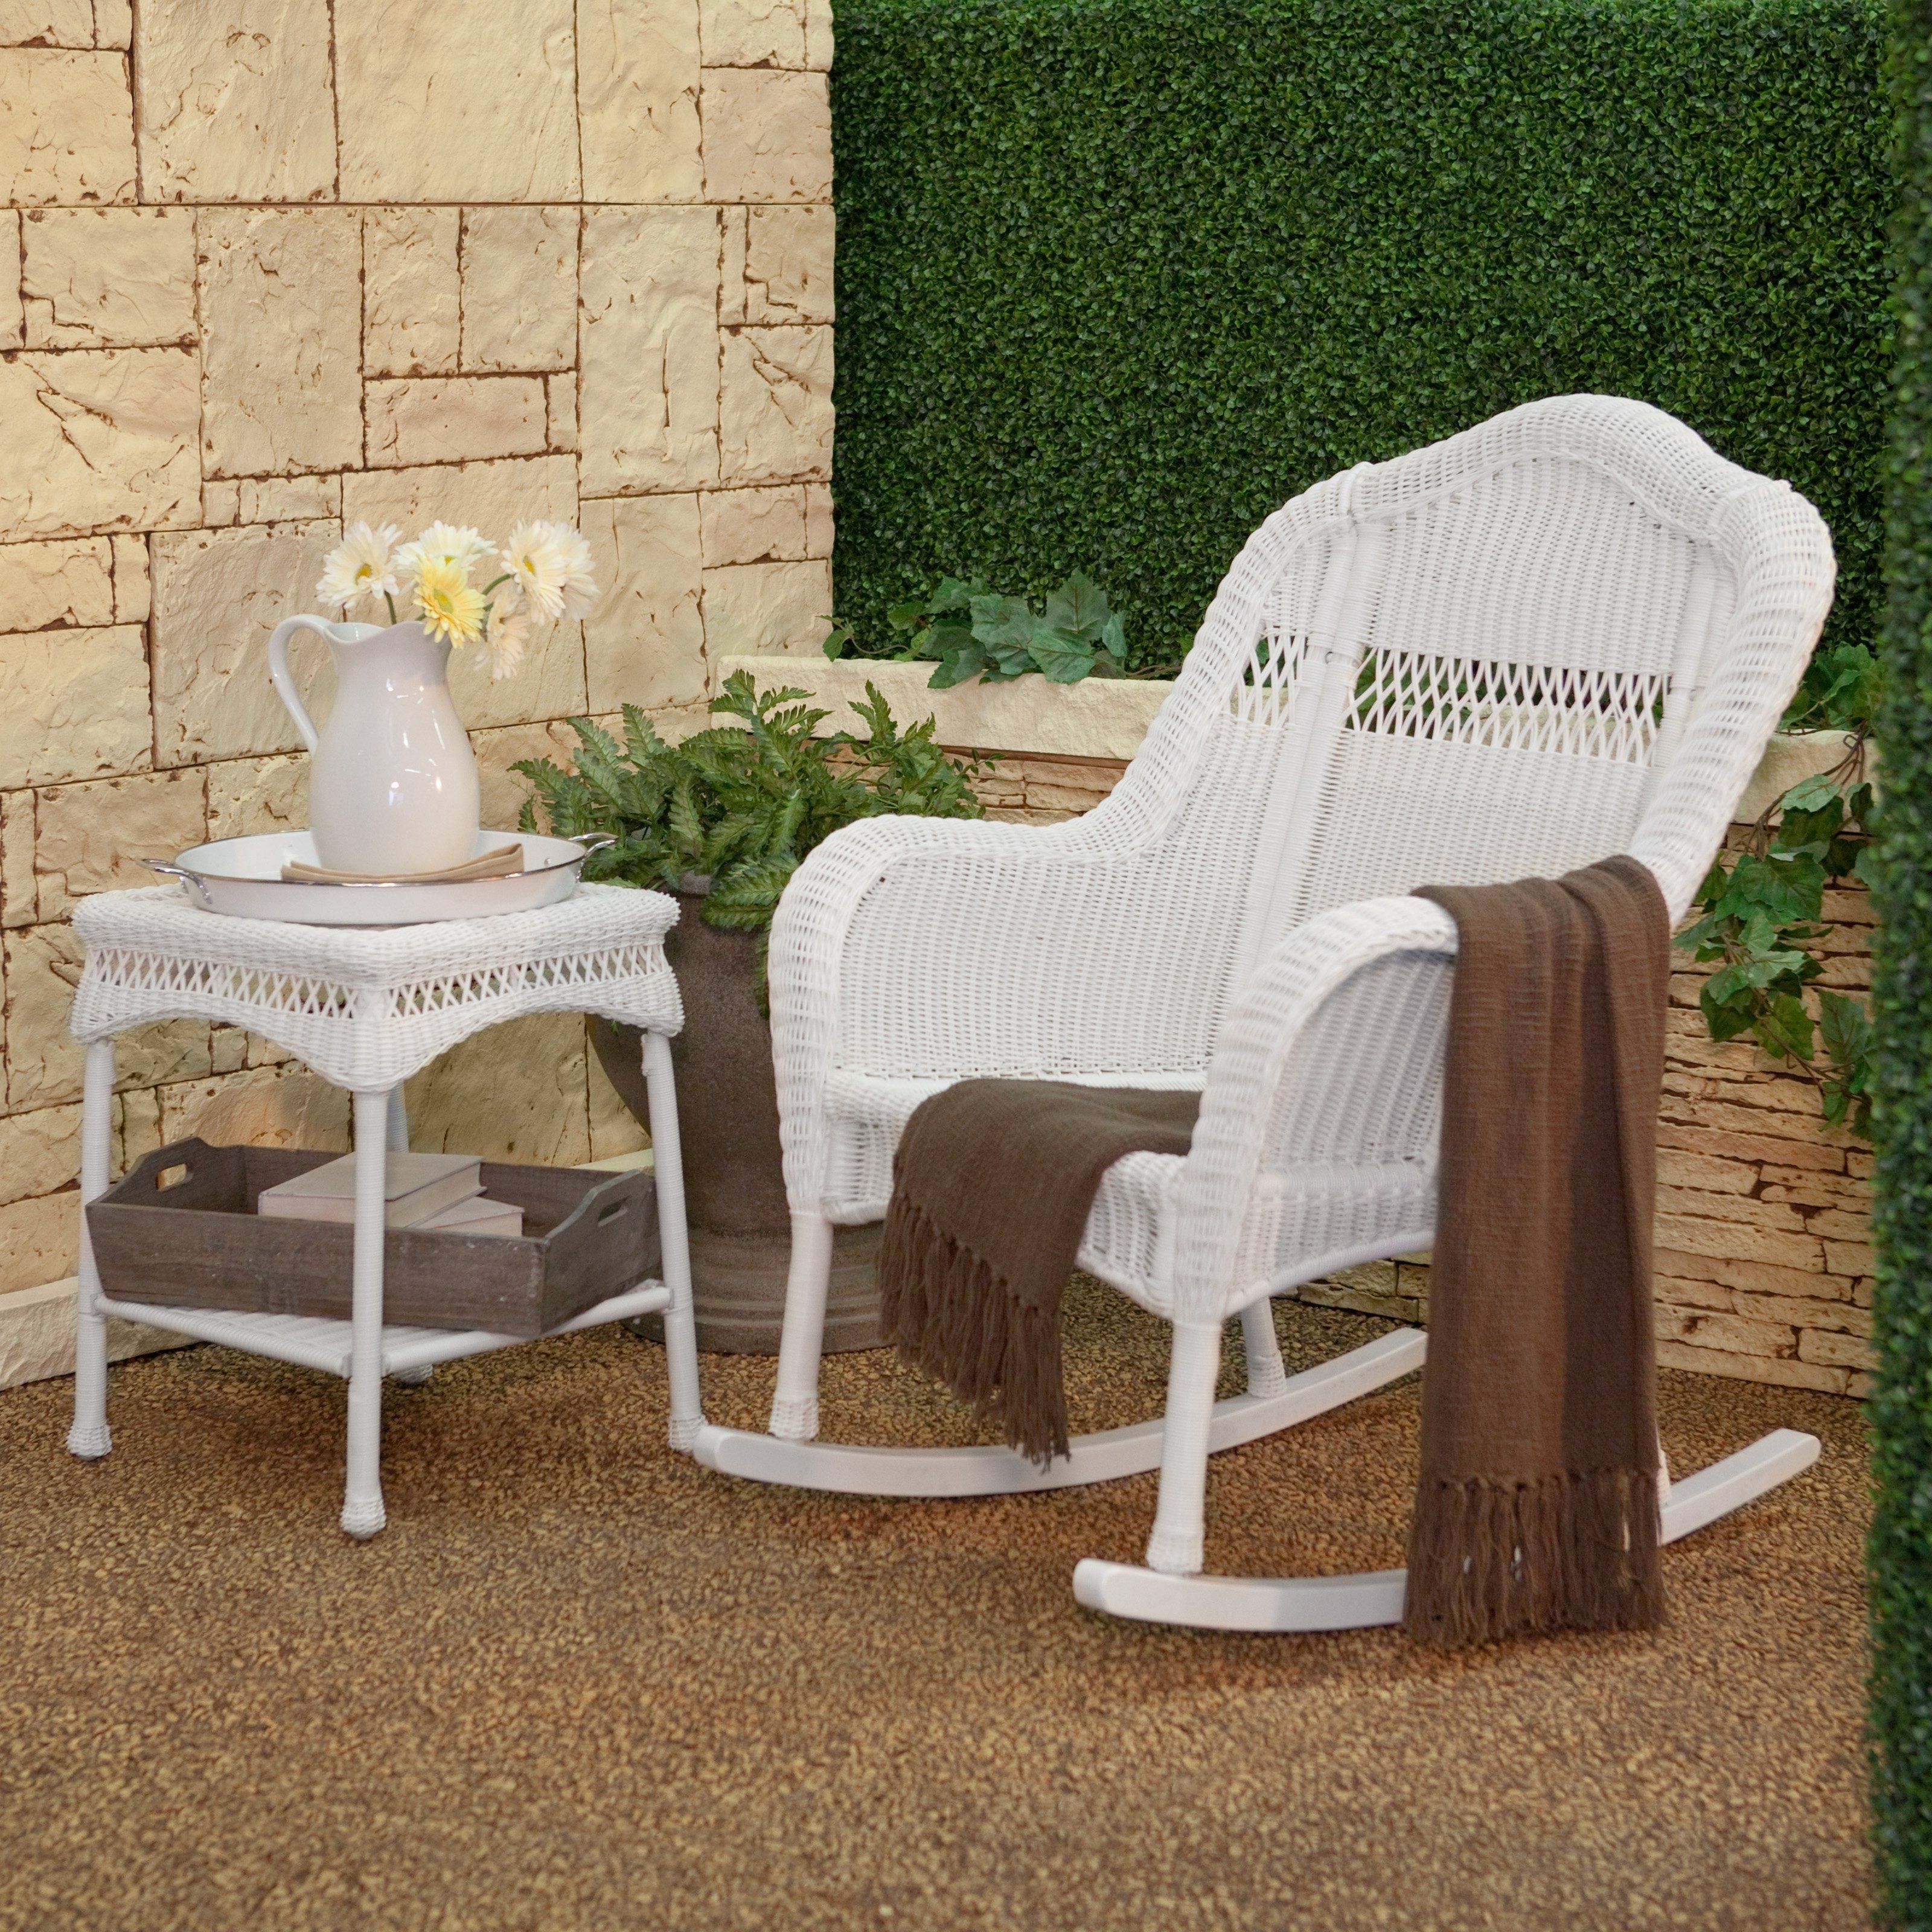 Coral Coast Casco Bay Resin Wicker Rocking Chair With Cushion Option With Outdoor Wicker Rocking Chairs (View 6 of 15)